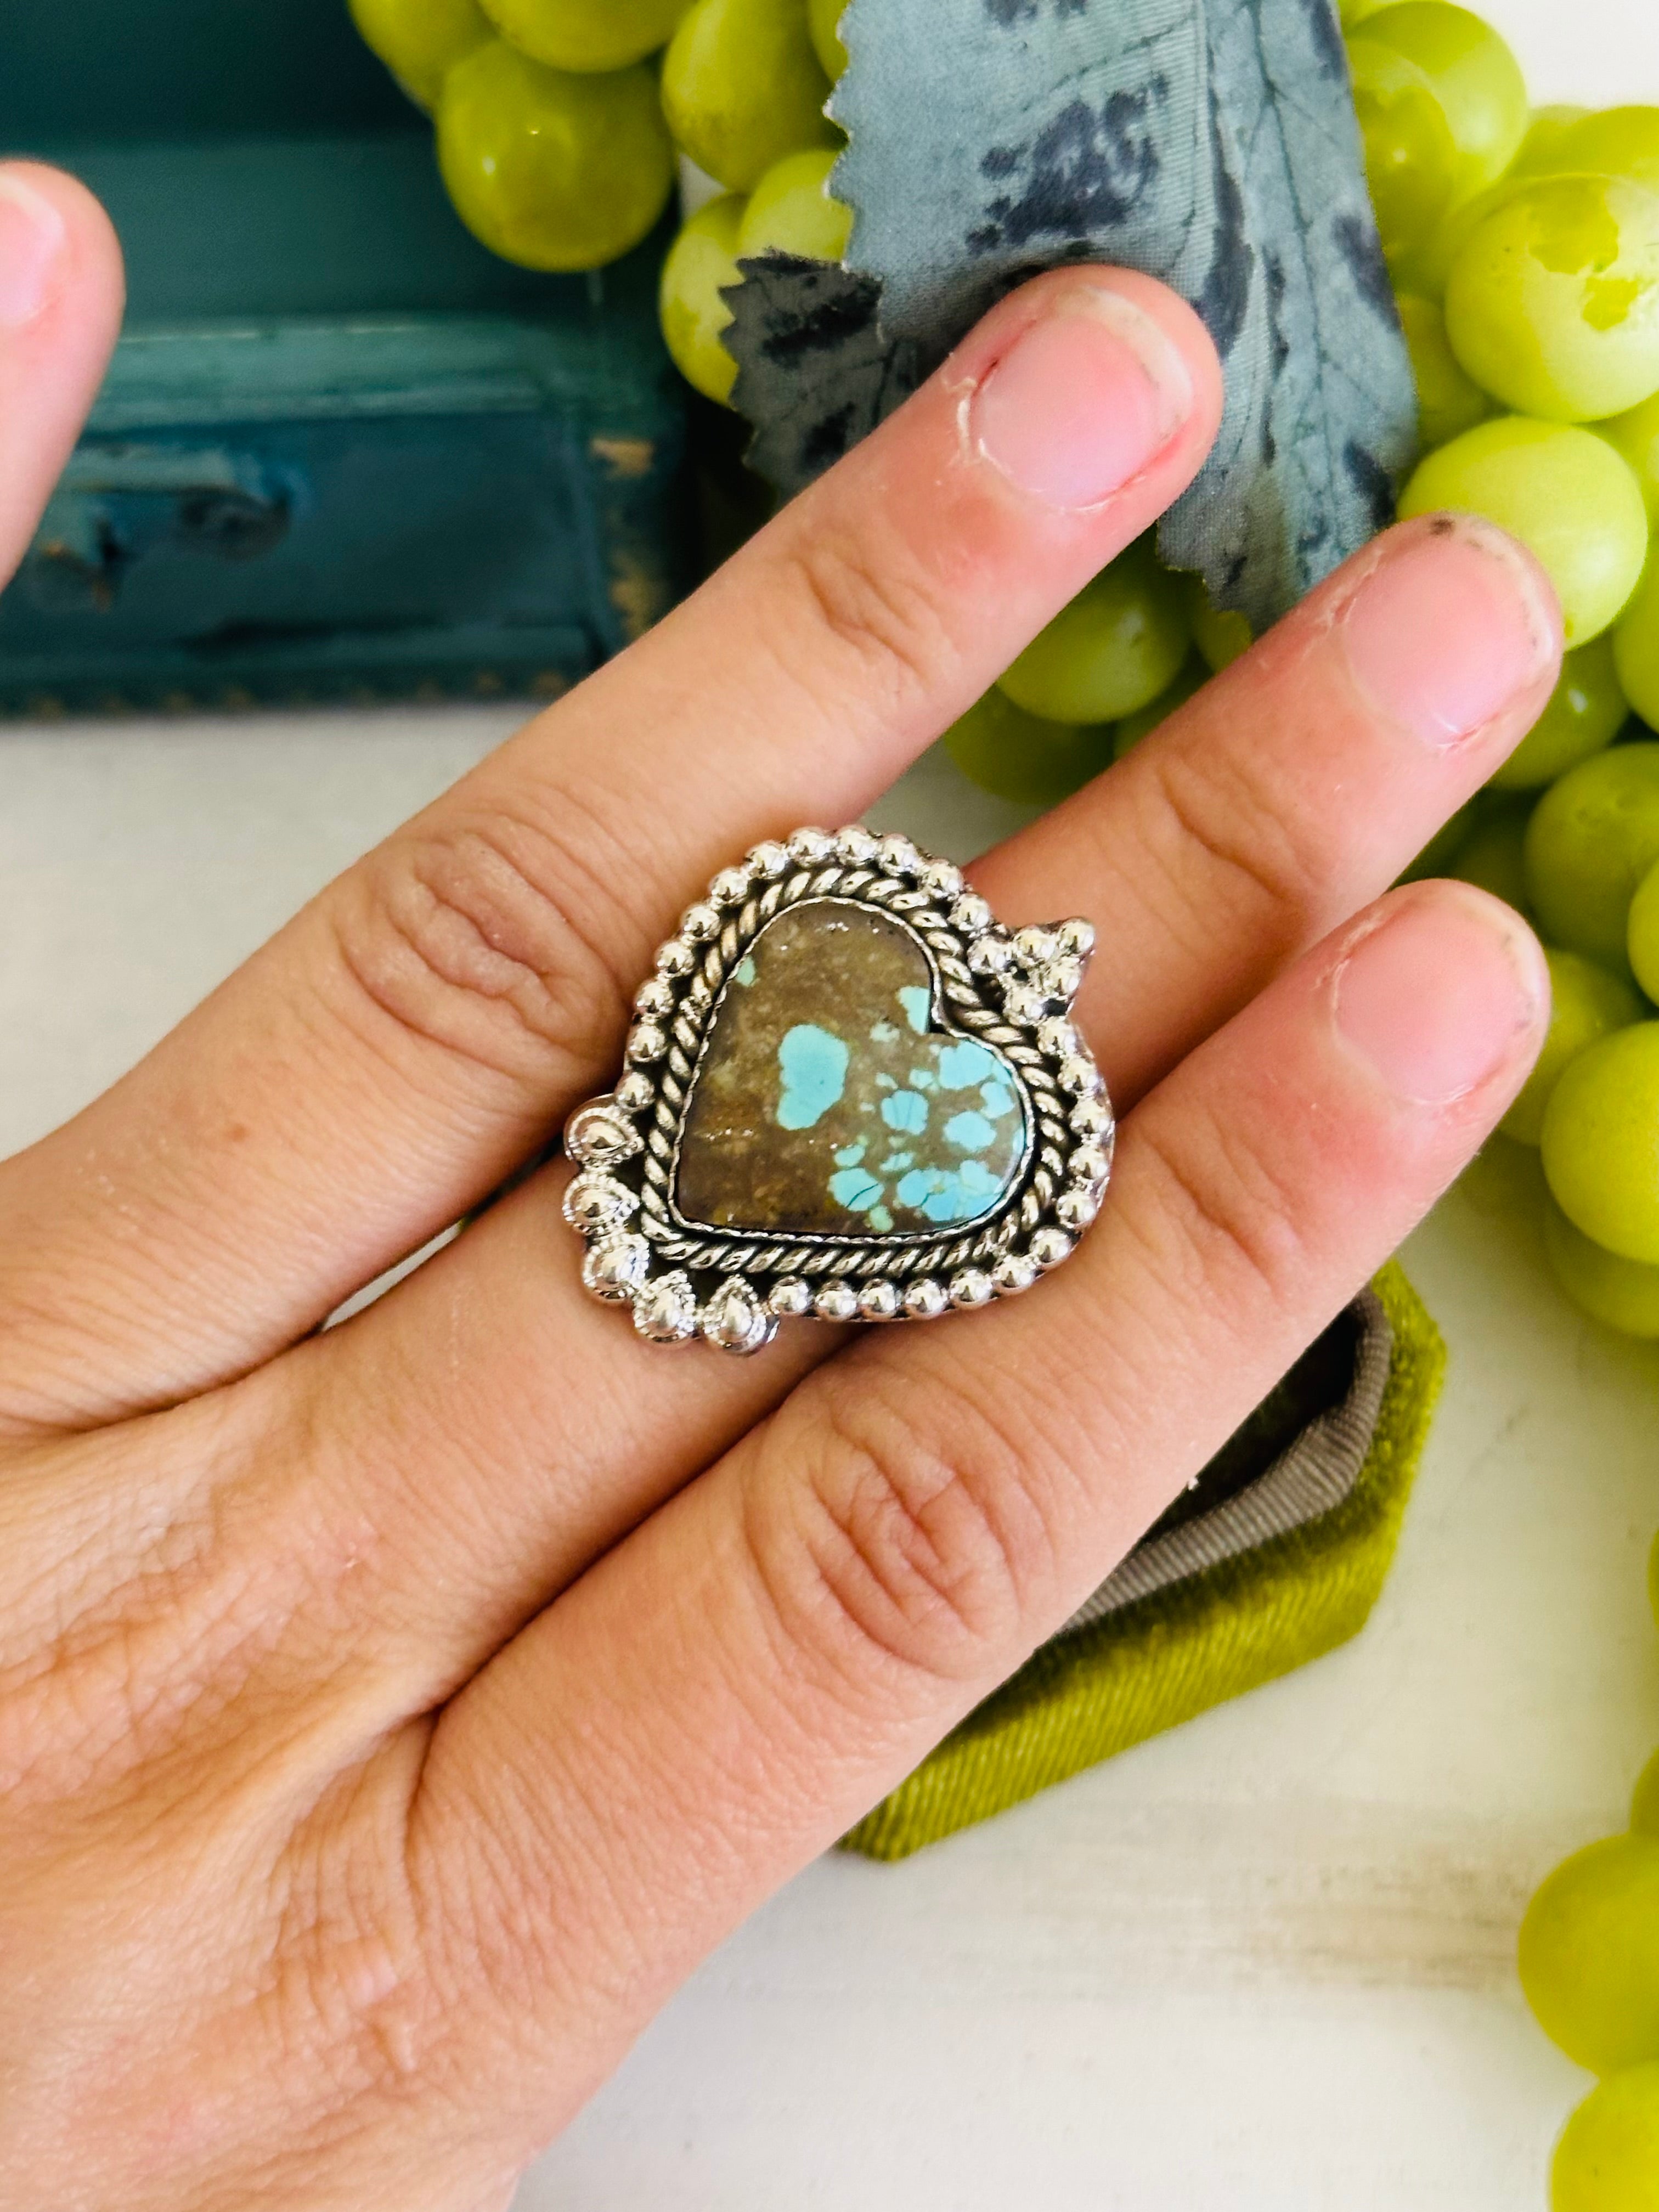 Southwest Handmade #8 Turquoise & Sterling Silver Adjustable Heart Ring